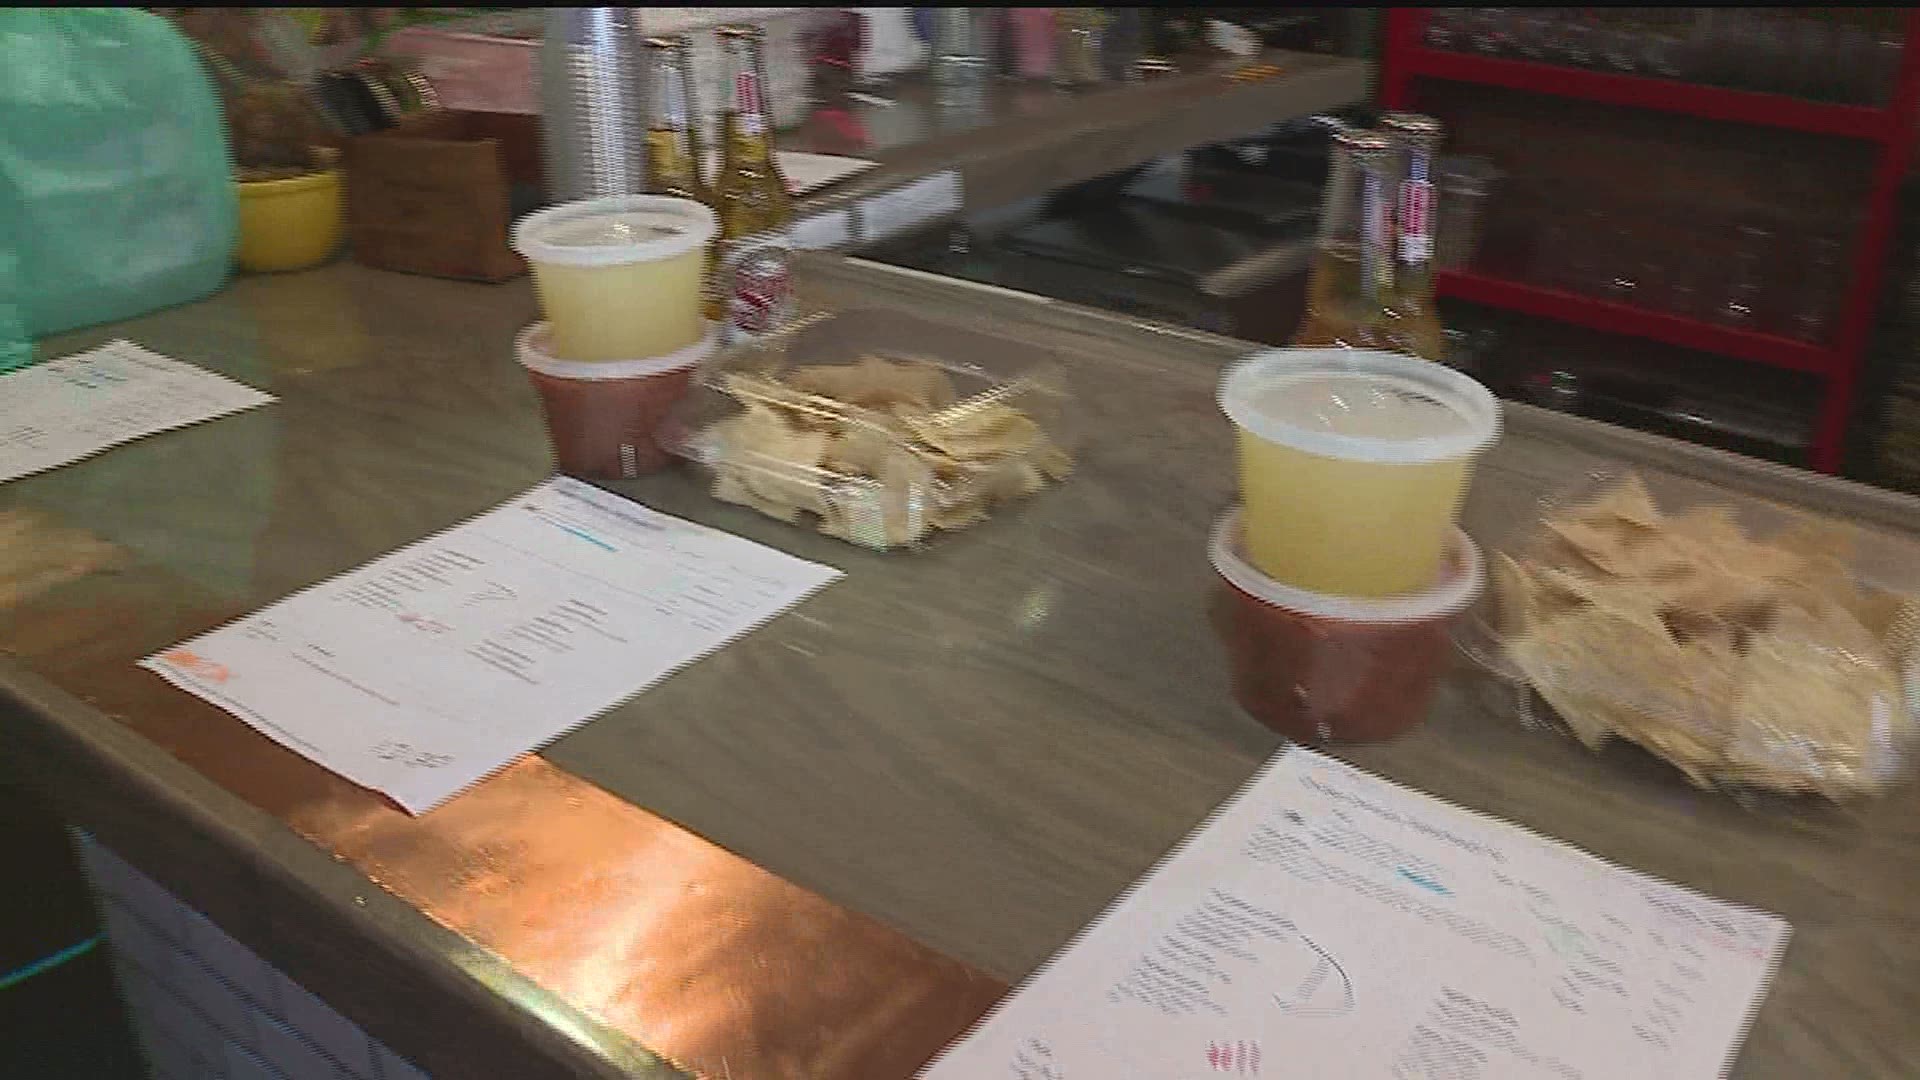 'The Cantina' in York would normally see hundreds of customers on Cinco de Mayo. Now, Taco Tuesday is ushering in 90 pick-up orders